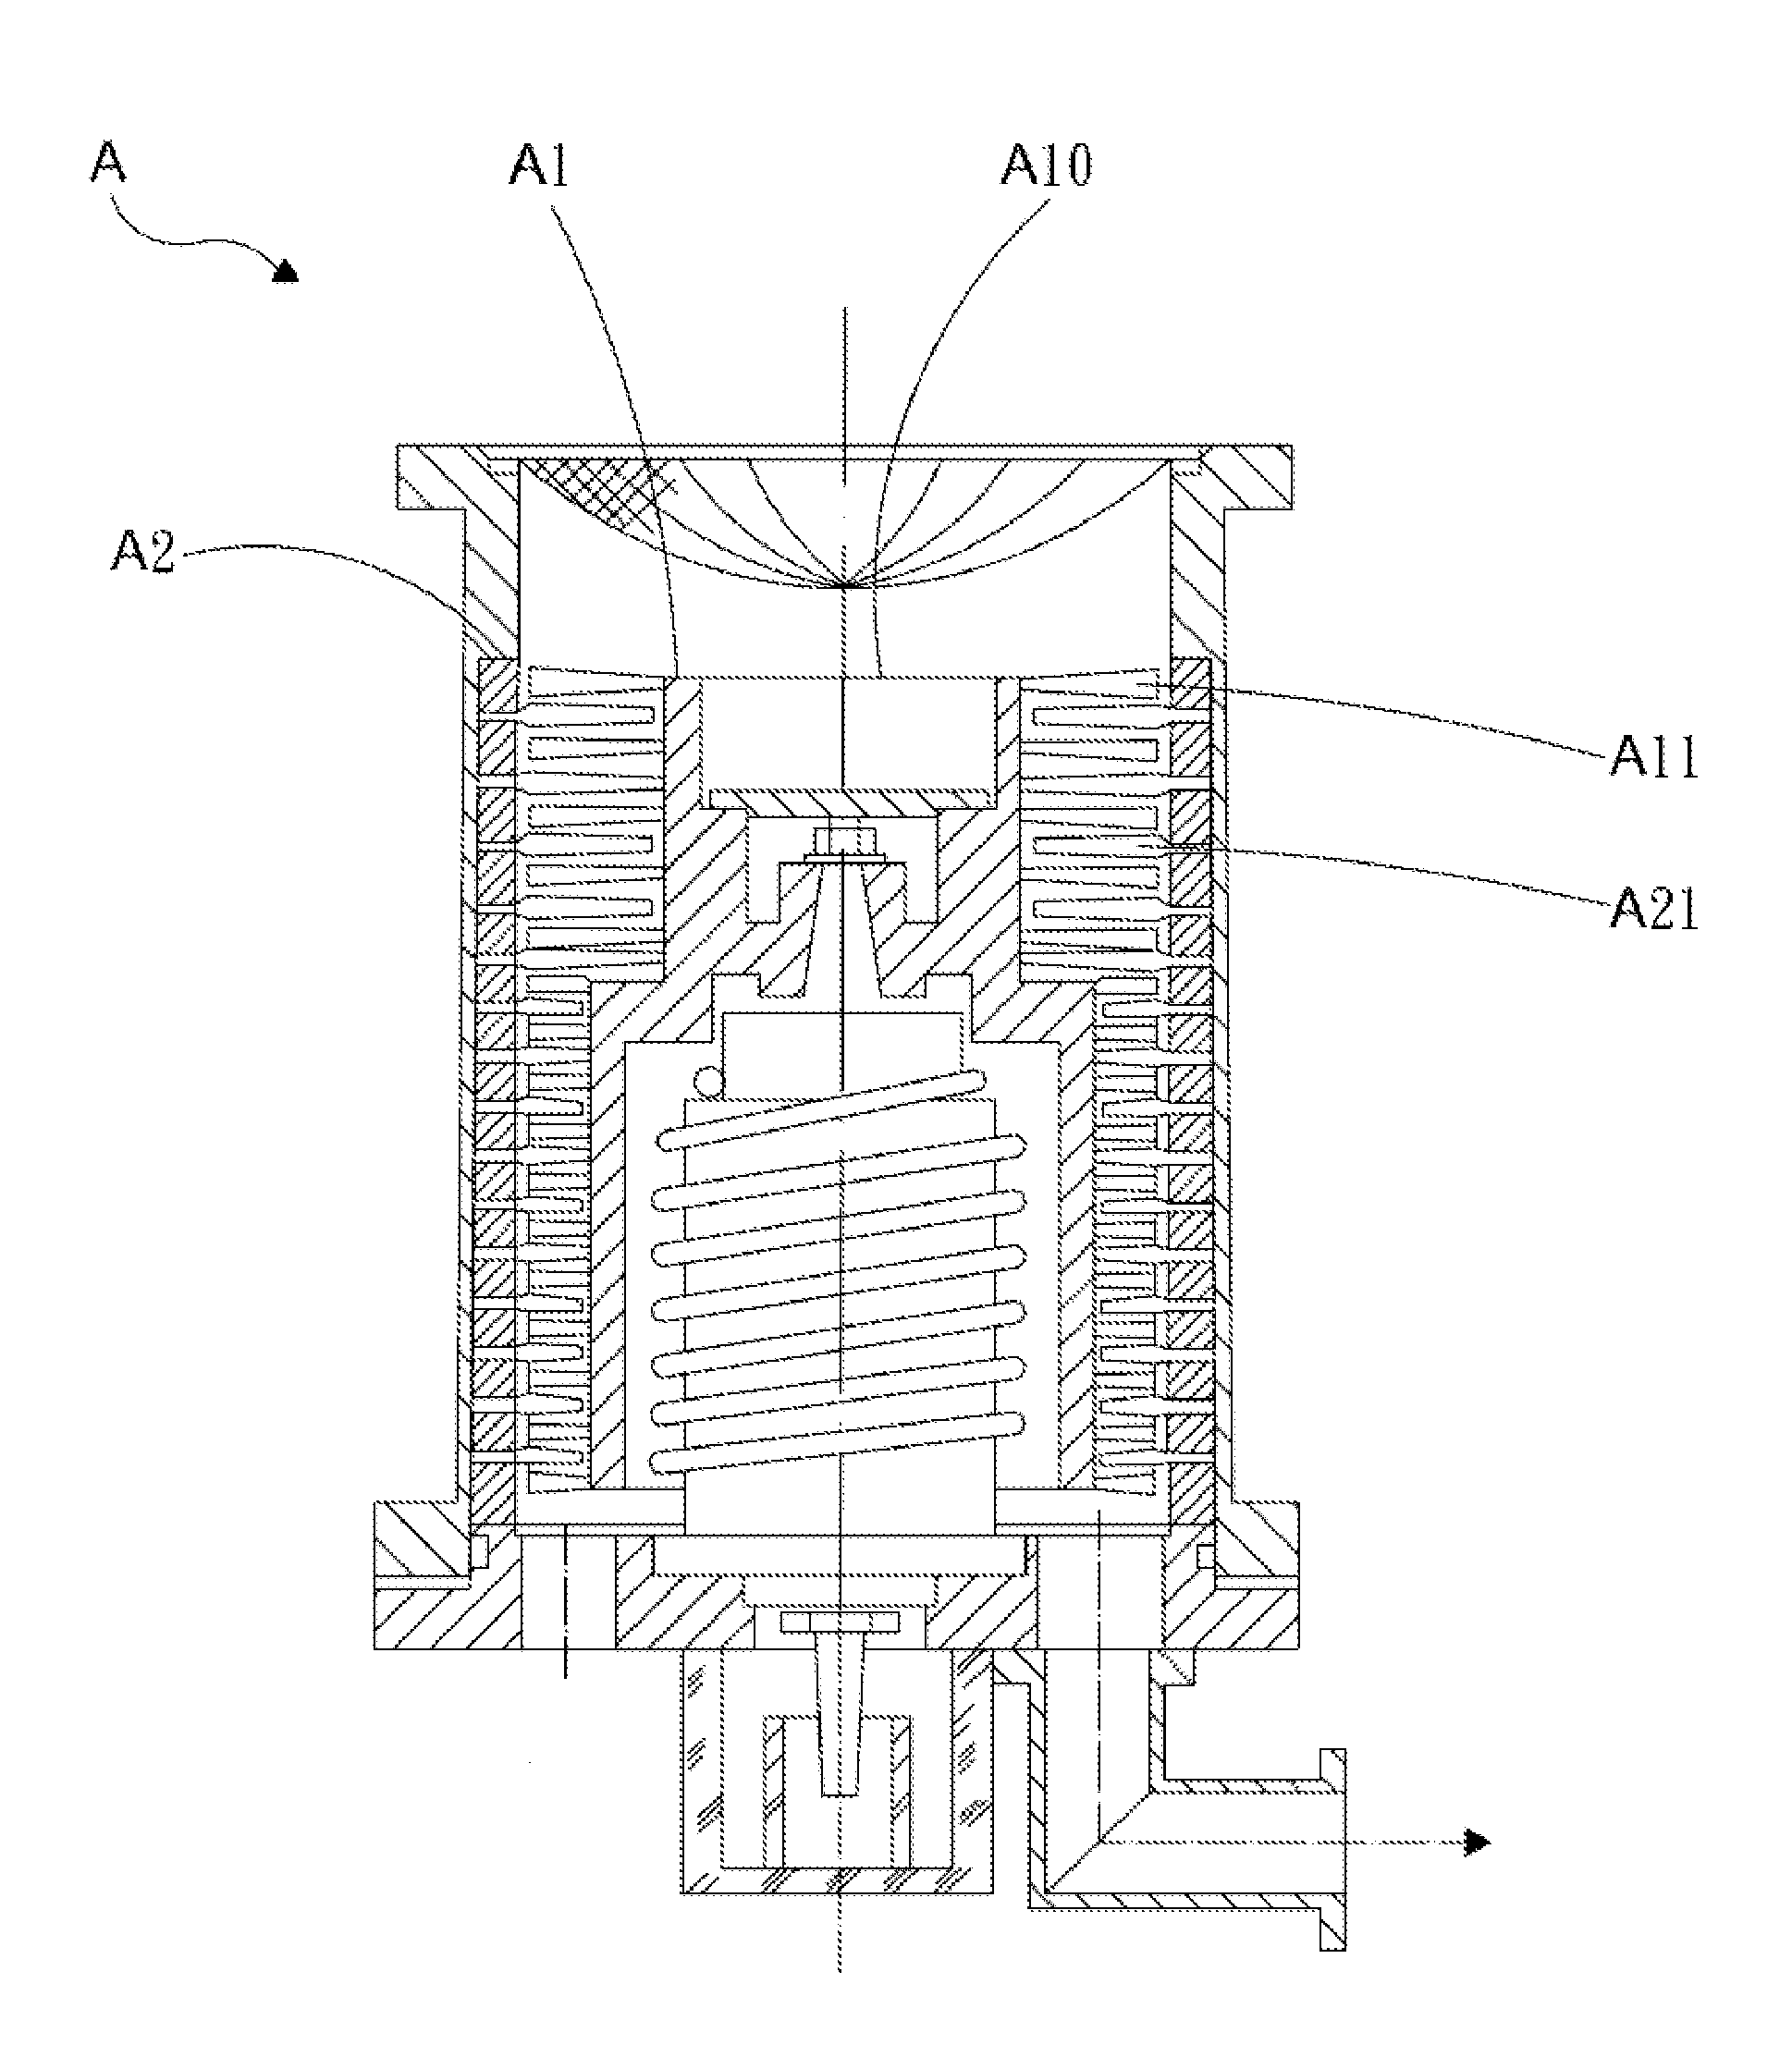 Turbo Molecular Pump with Improved Blade Structures